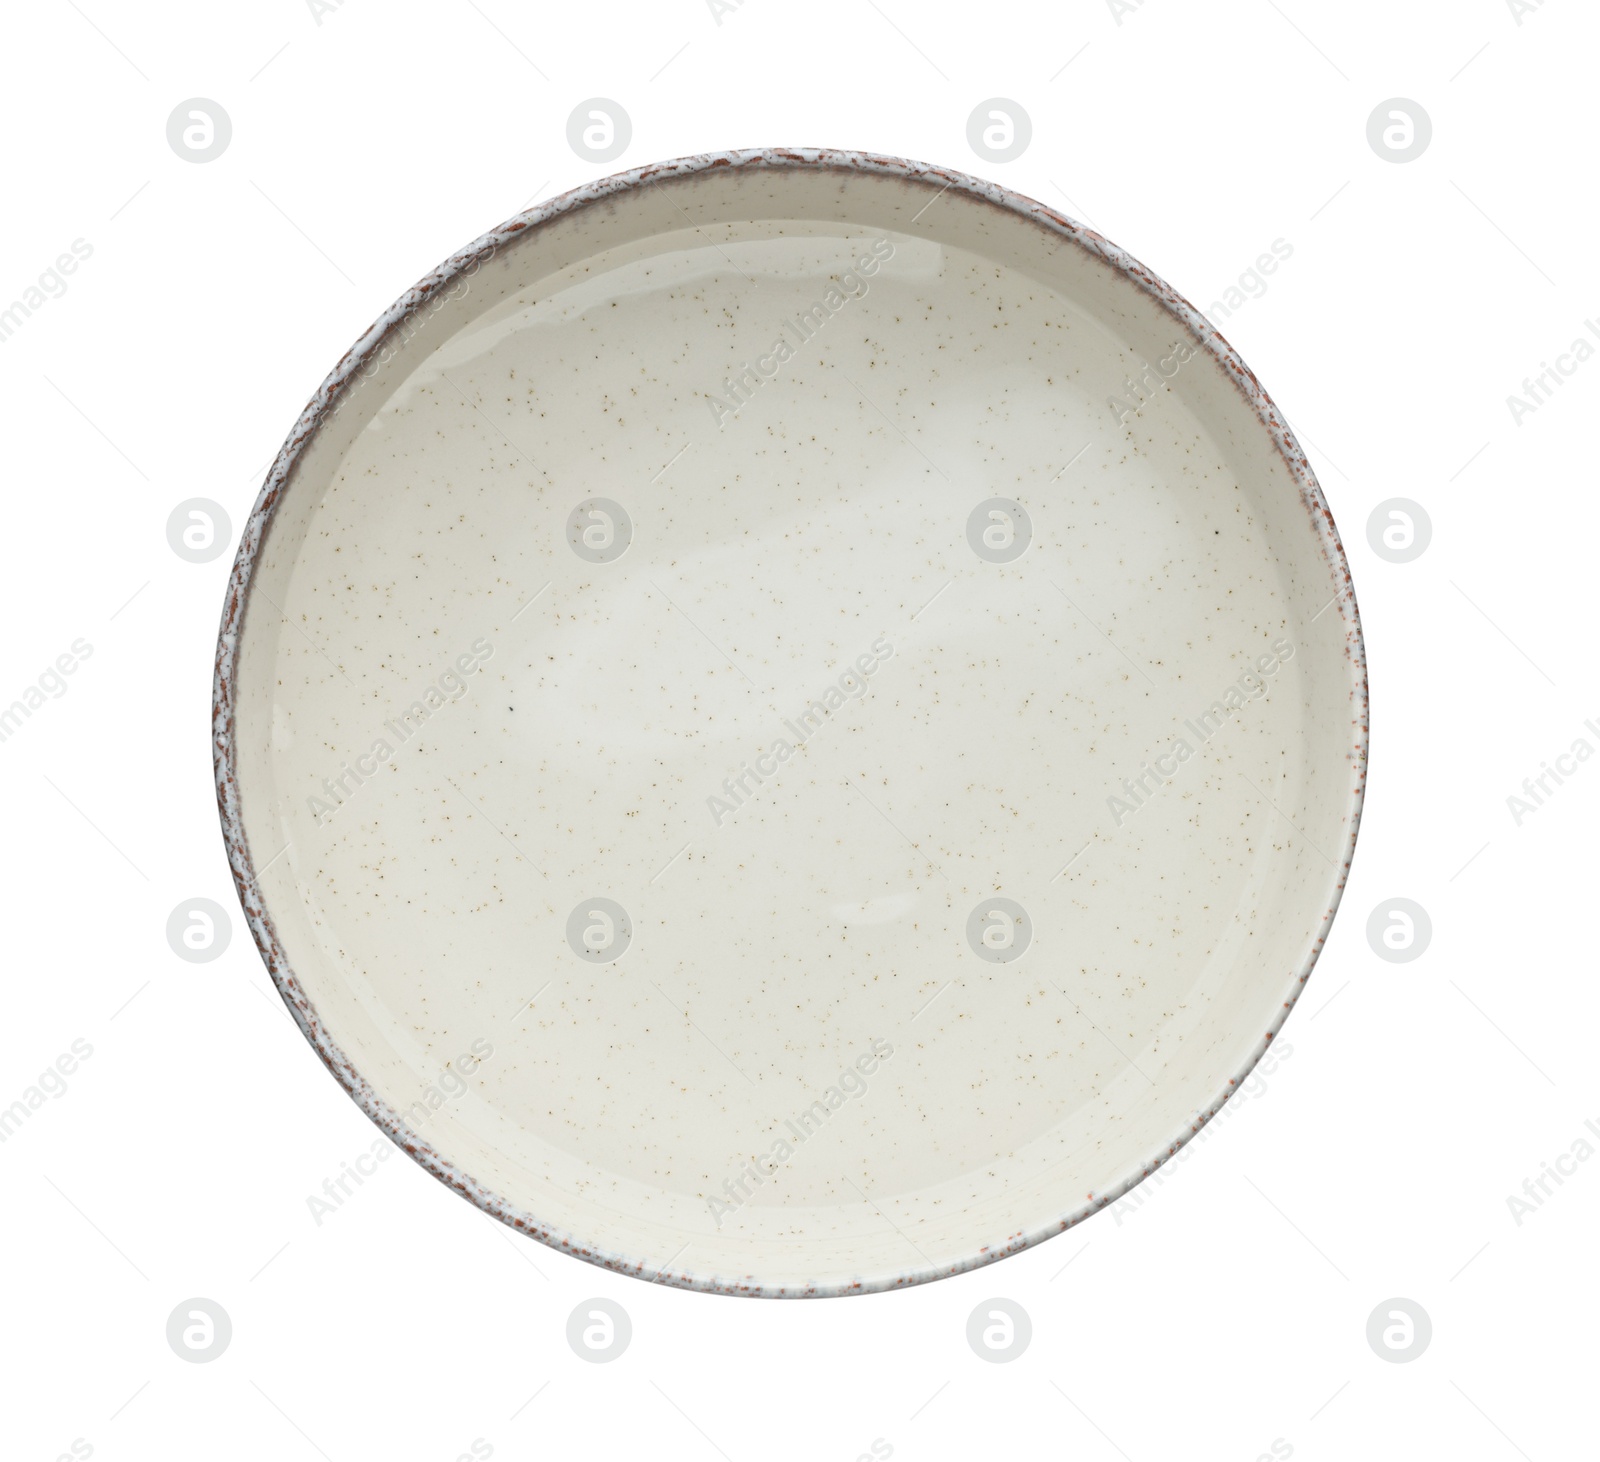 Photo of Ceramic bowl with clear water isolated on white, top view